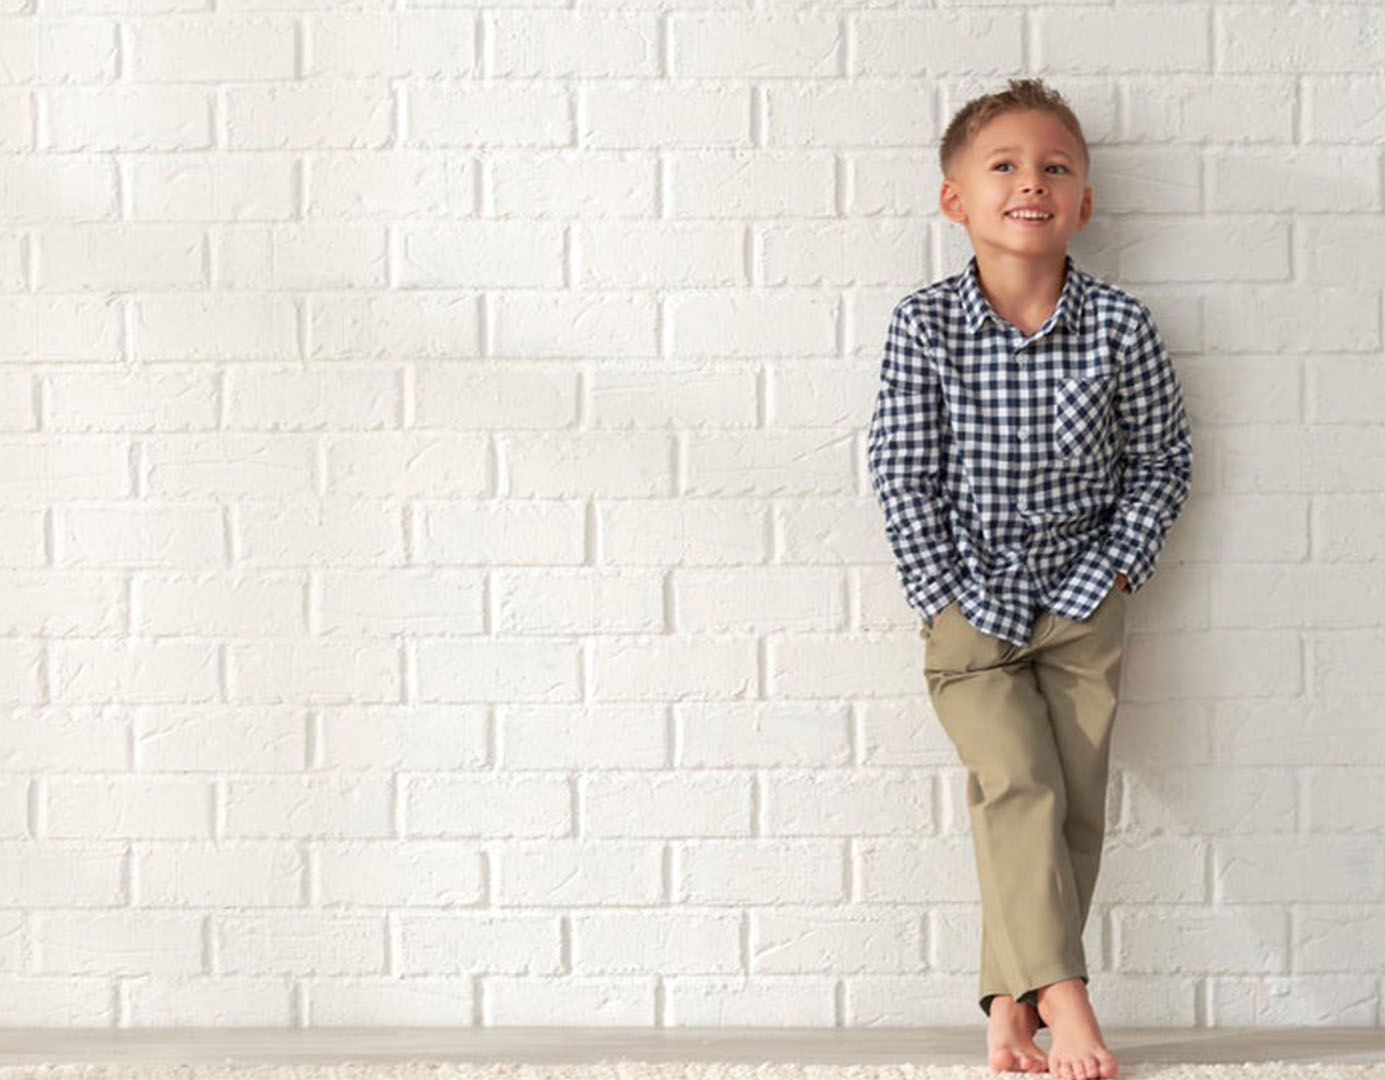 An adorable little boy posing confidently in front of a plain white wall.